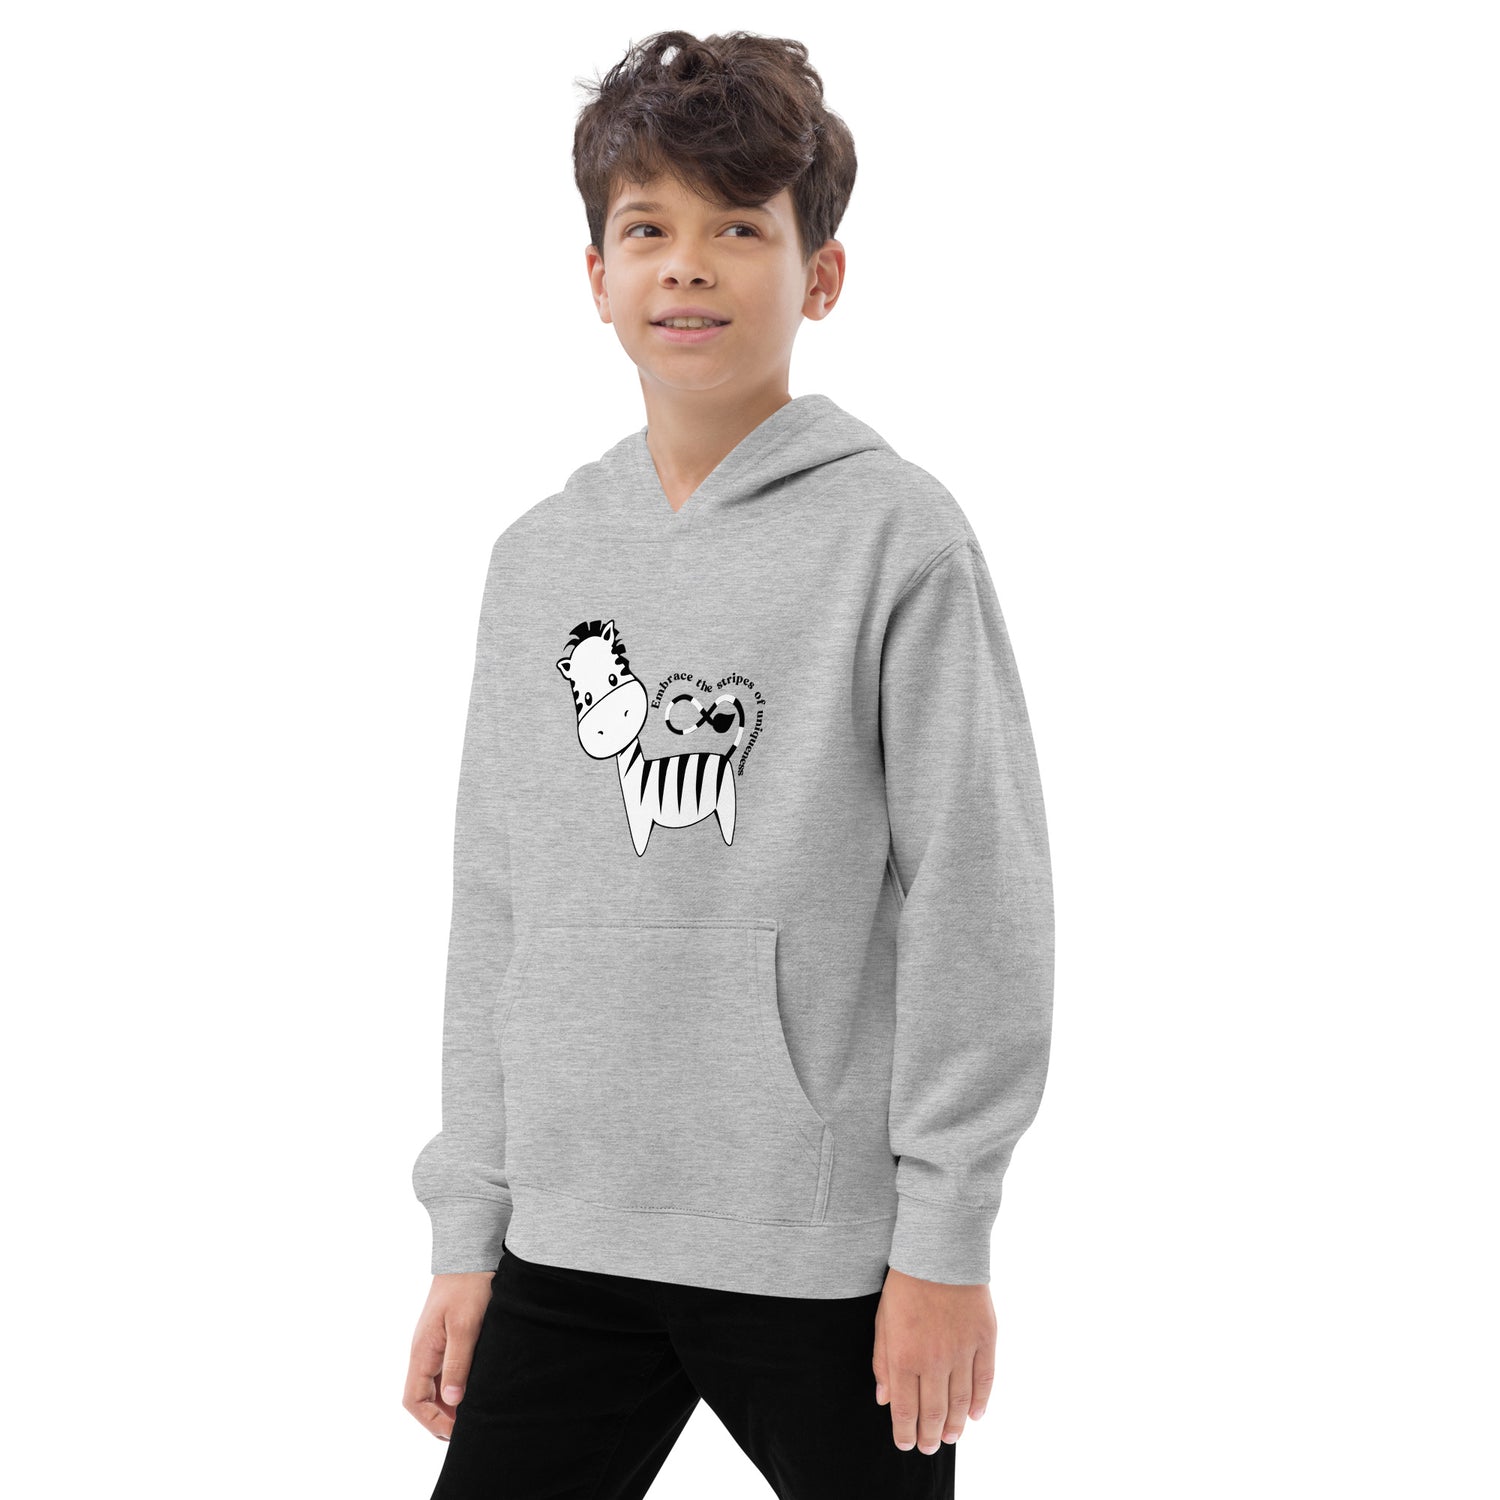 left-front of grey kidswear hoodie with pockets, featuring "zebra print design " design.